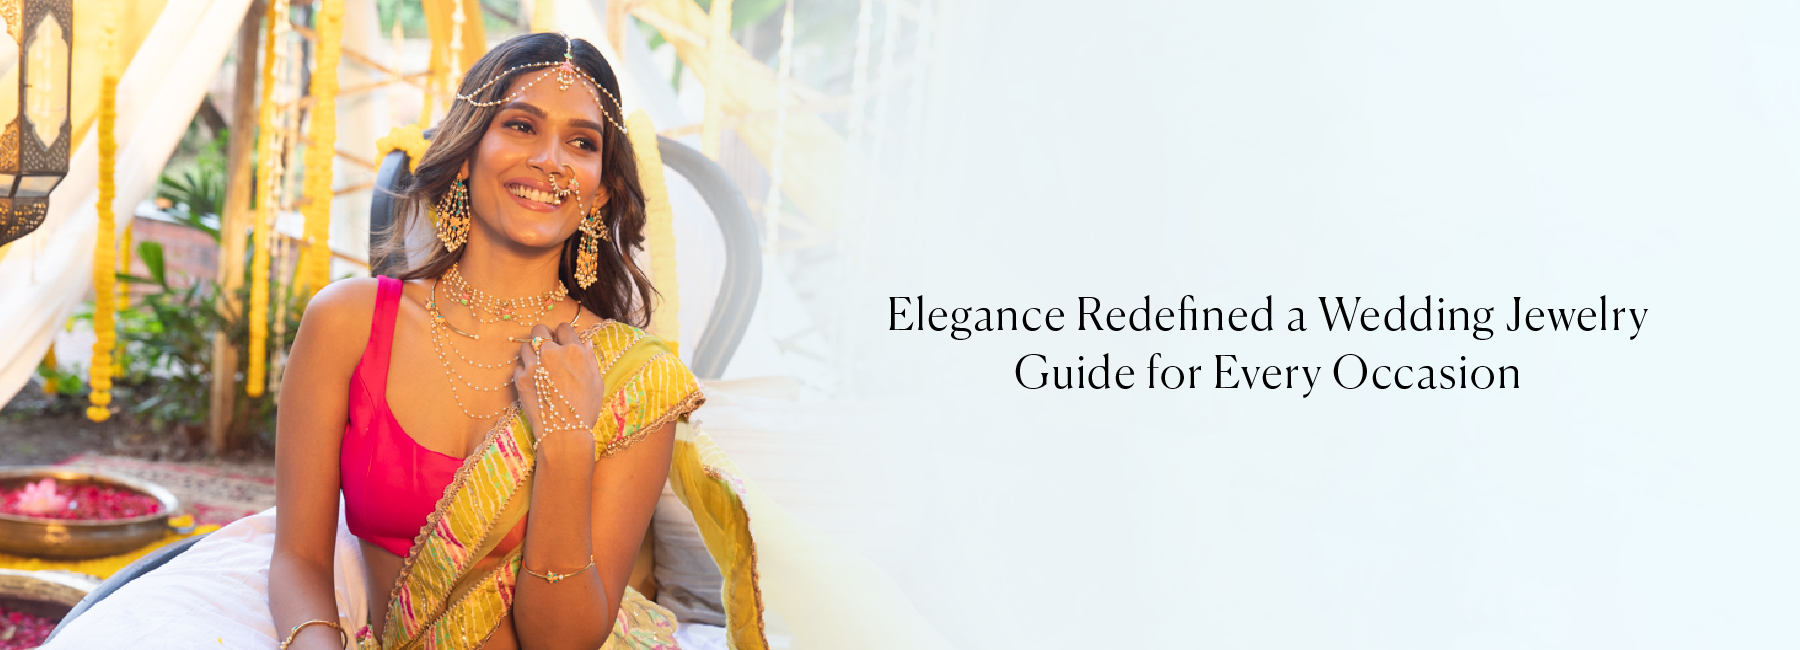 Elegance Redefined a Wedding Jewelry Guide for Every Occasion